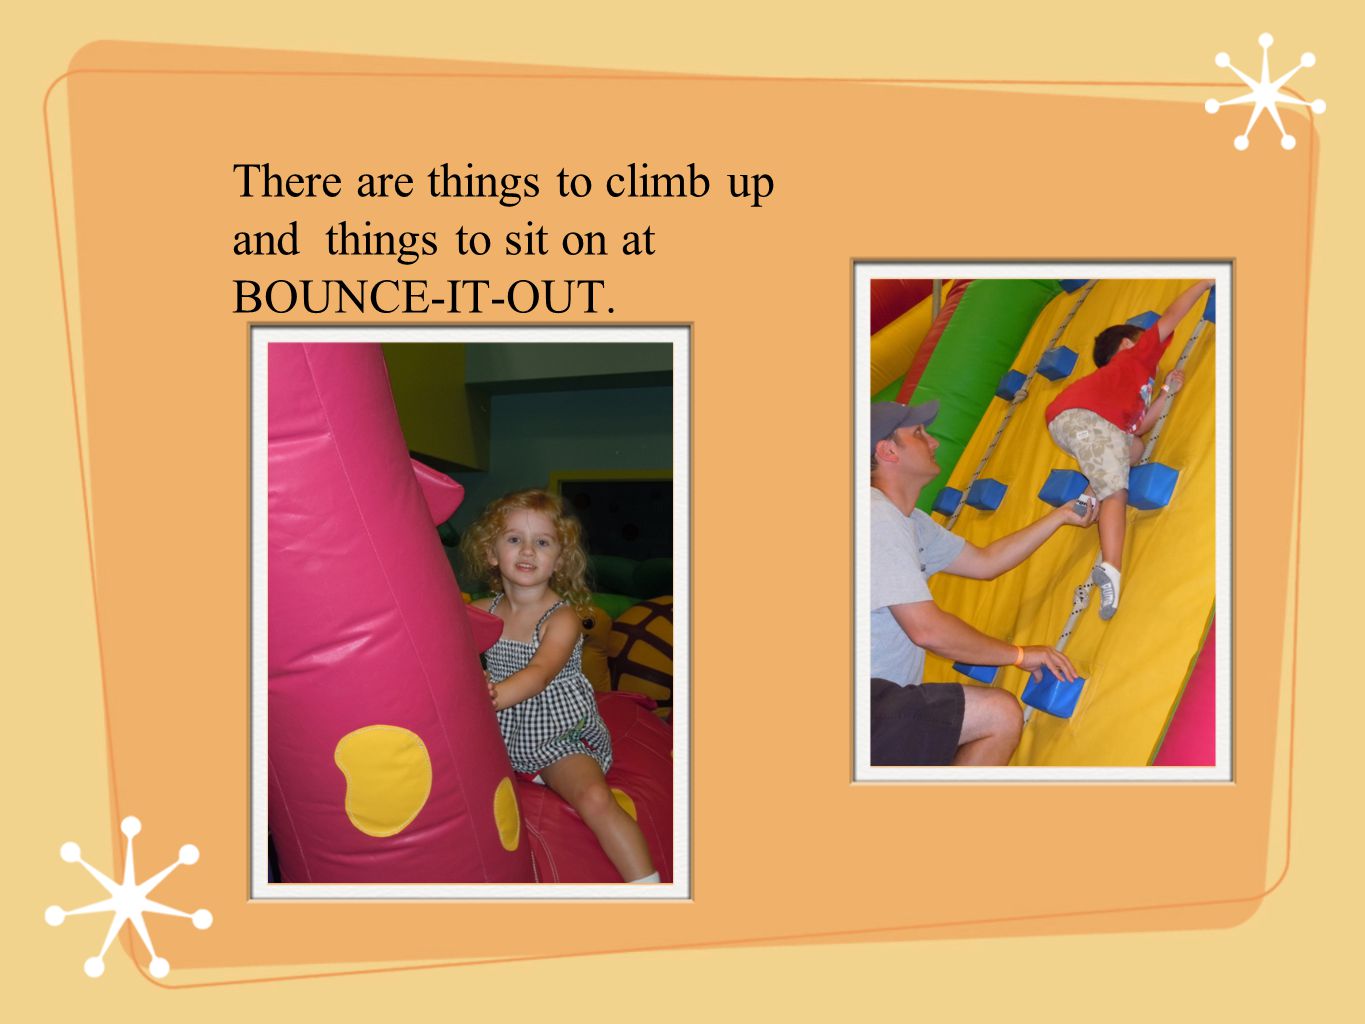 There are things to climb up and things to sit on at BOUNCE-IT-OUT.